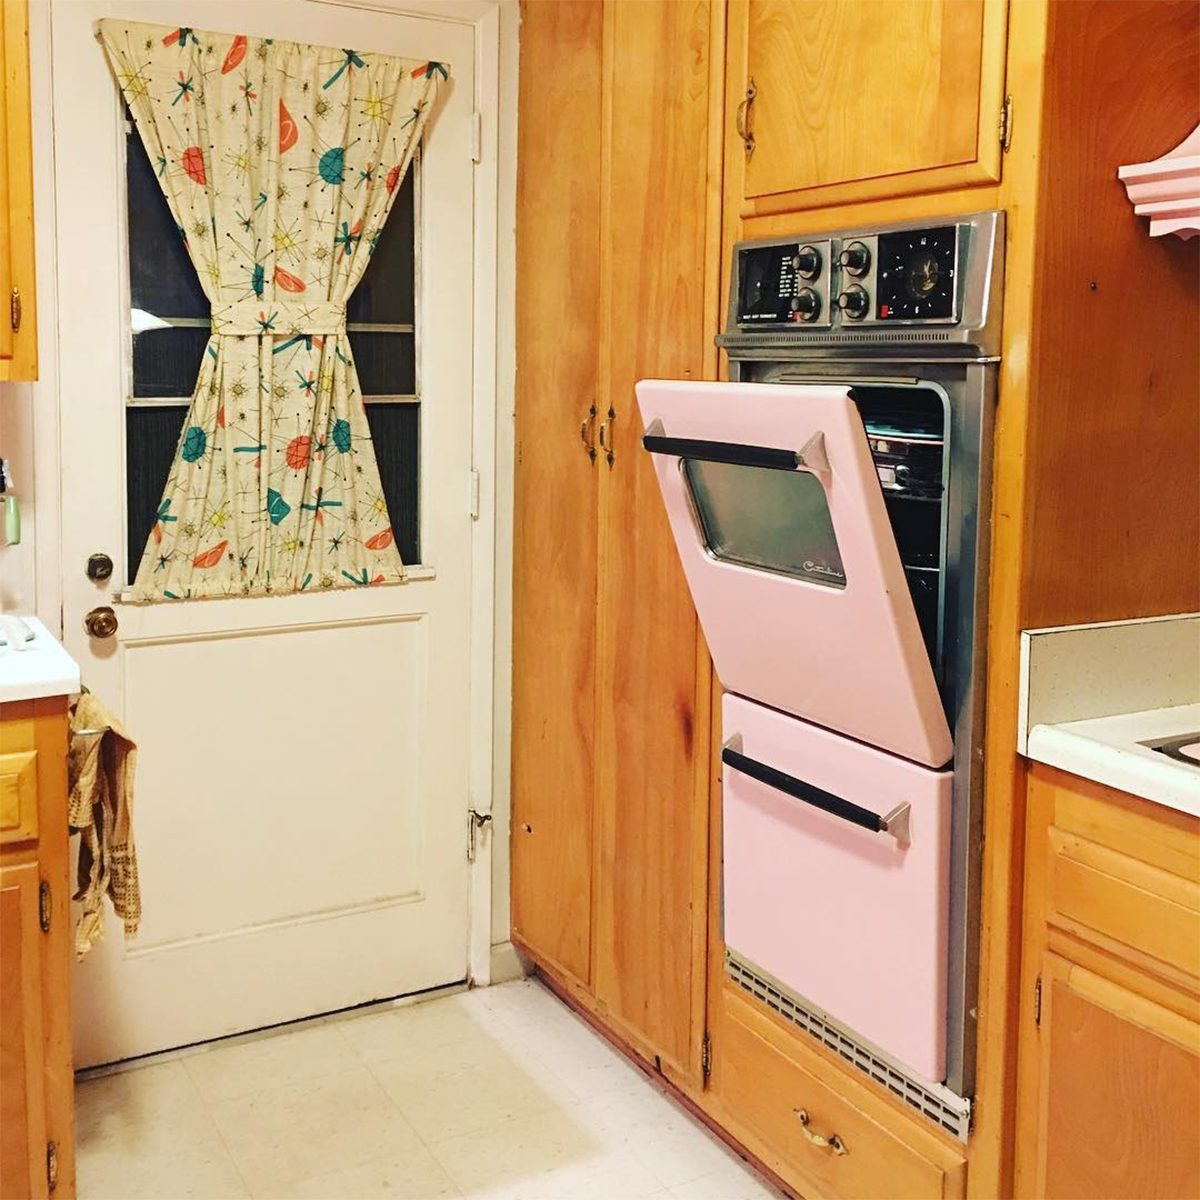 Whatever Happened To The Colorful Kitchen? - Go Retro!